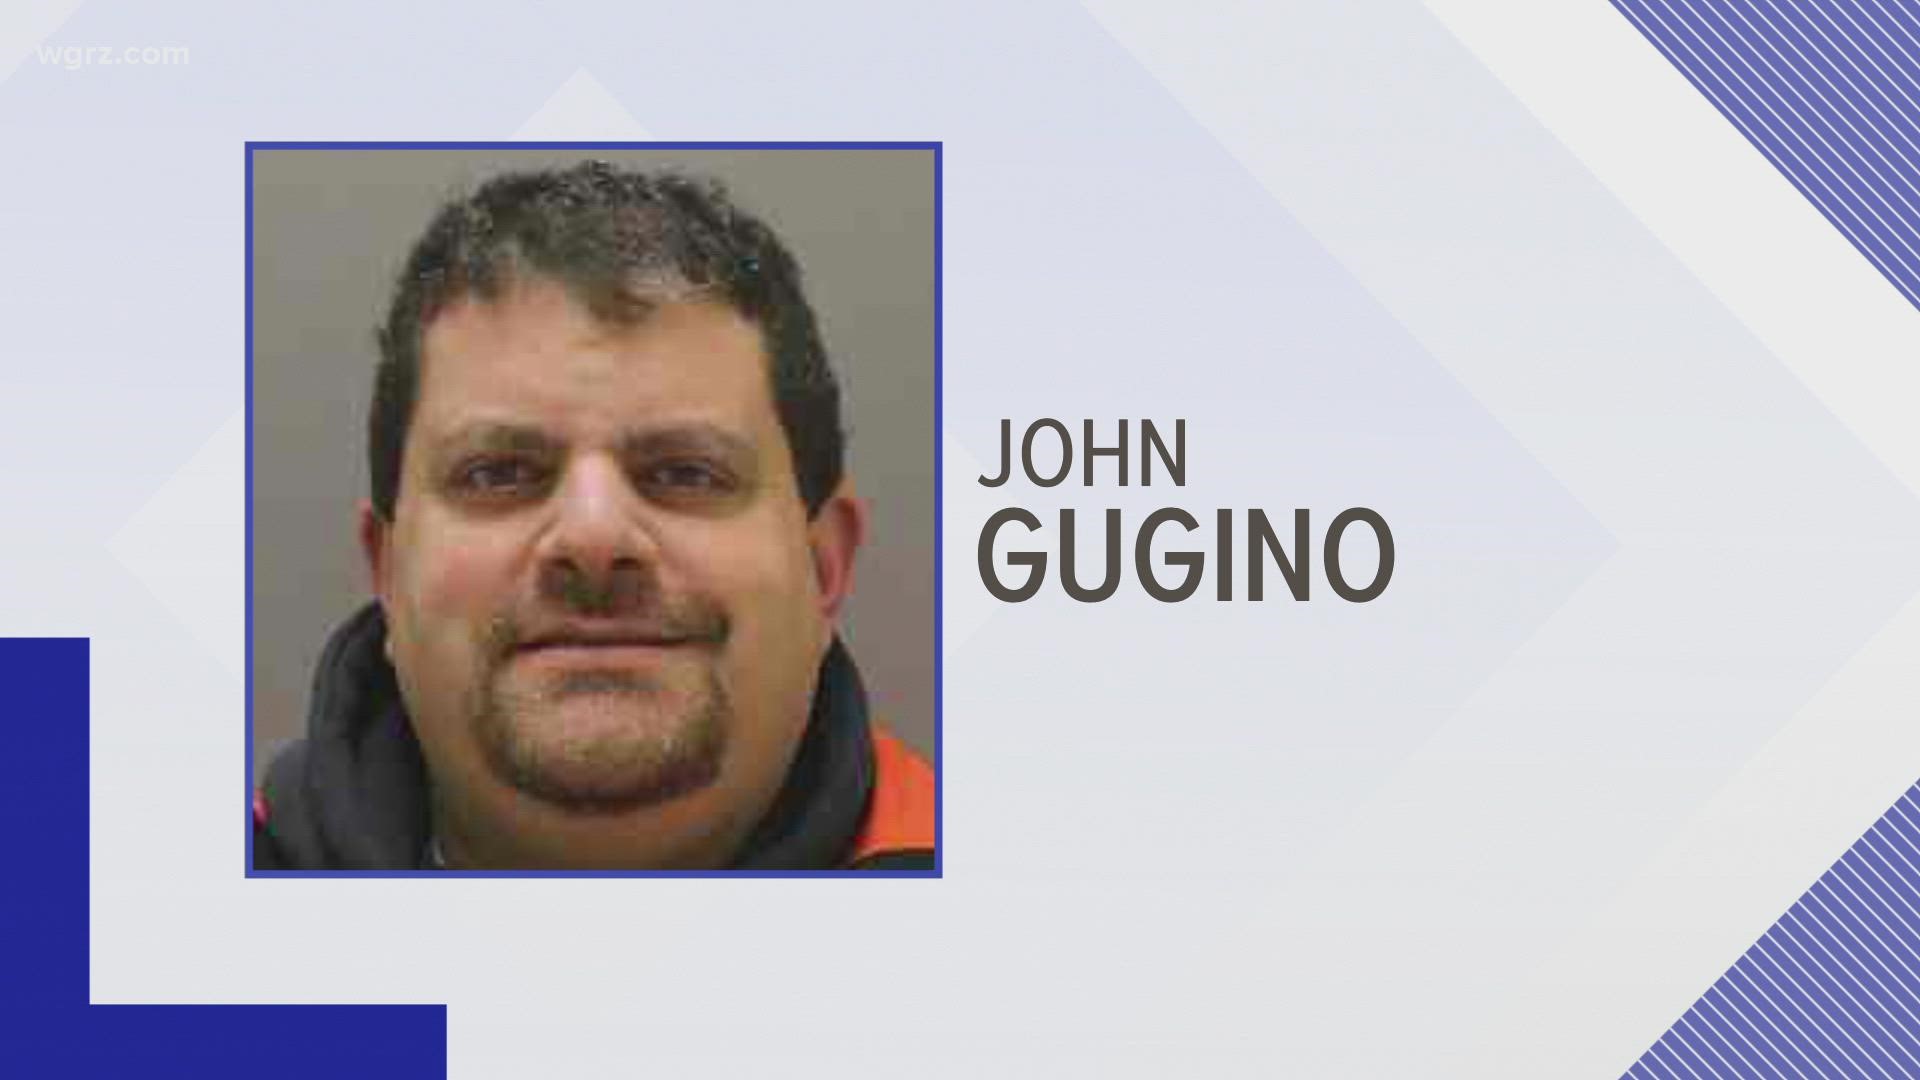 Gugino could get a year in jail when he's sentenced in July... the sheriff's office says he's still suspended without pay and waiting on a disciplinary hearing